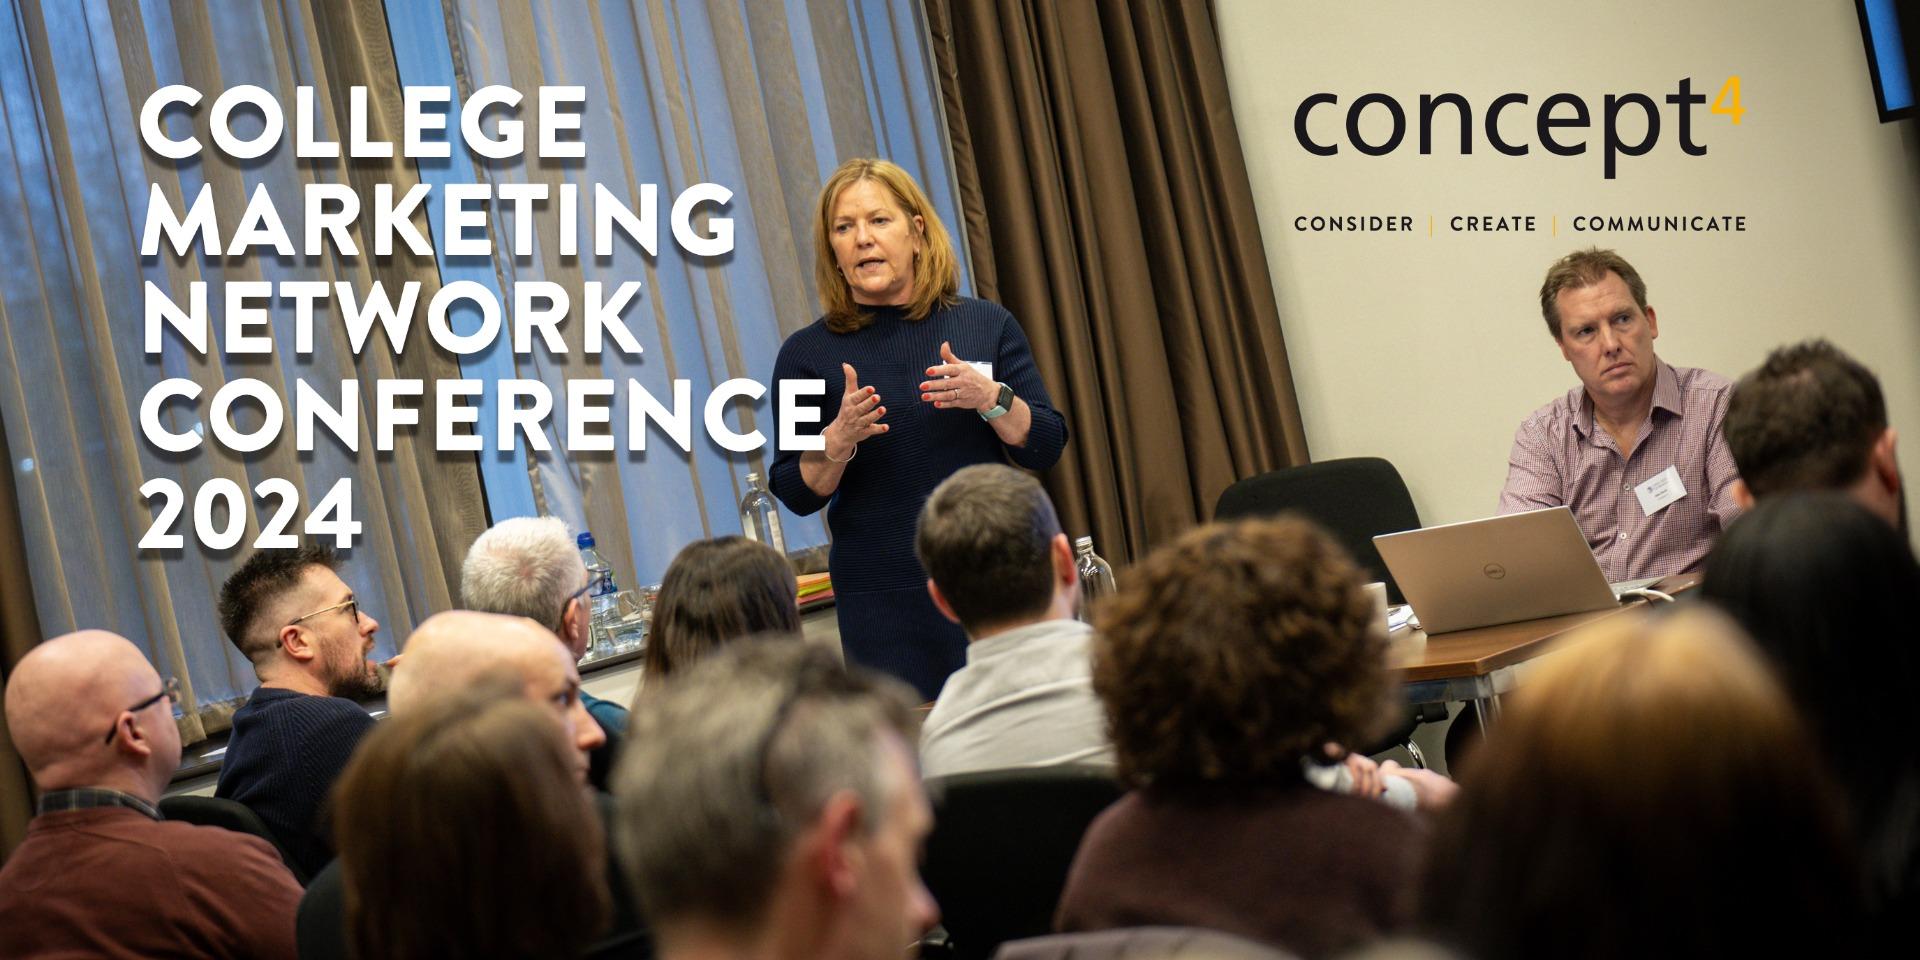 Concept4 at the College Marketing Network Conference 2024